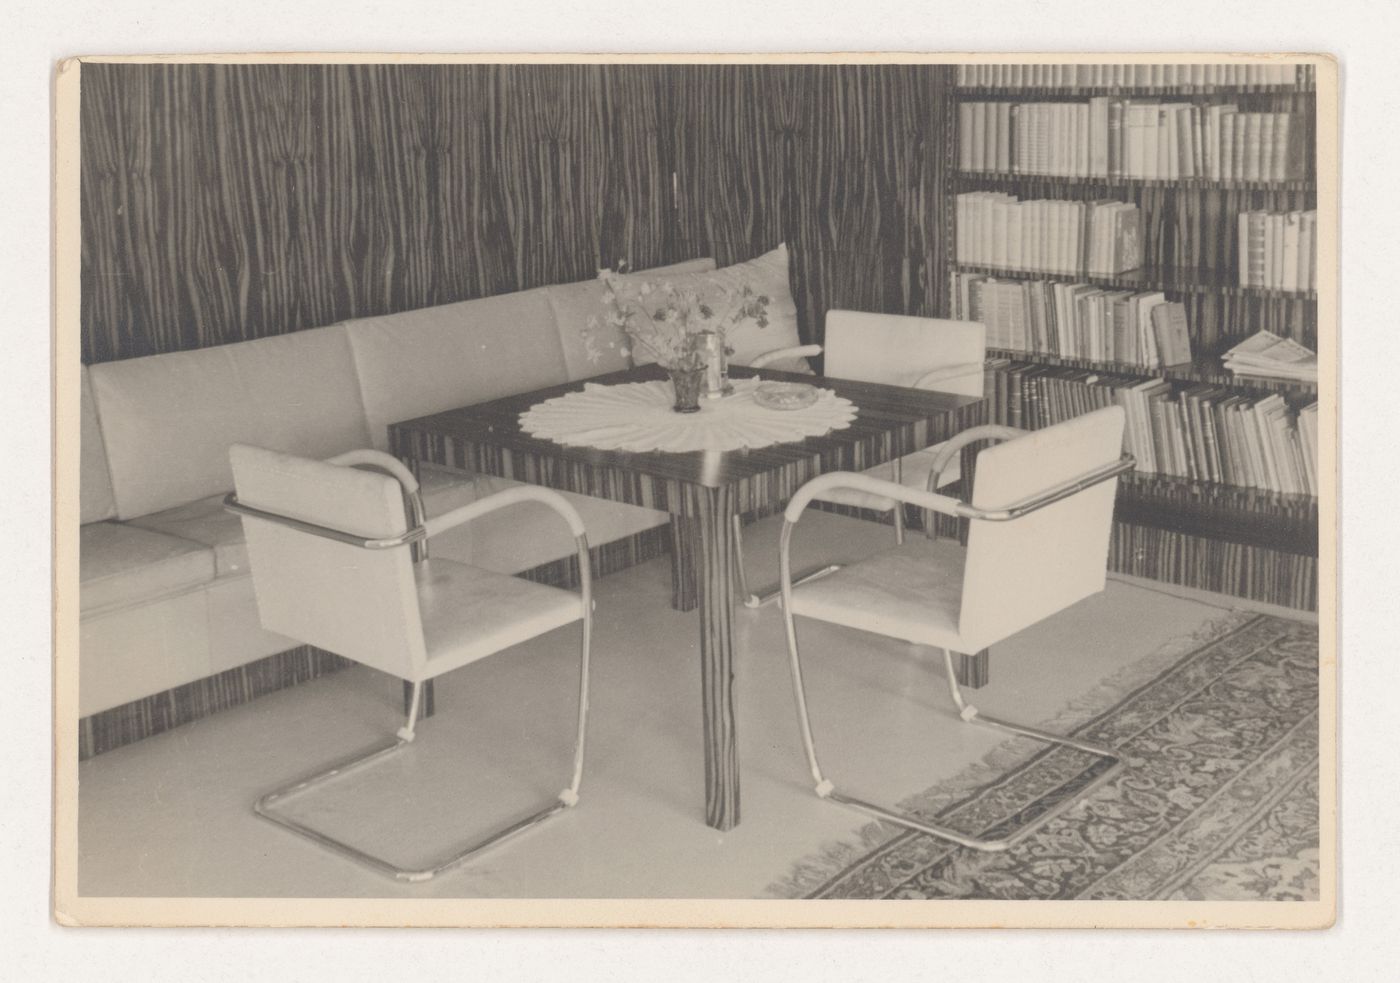 Interior view of a corner of the library showing a seating area, Tugendhat House, Brno, Czechoslovakia (now Czech Republic)